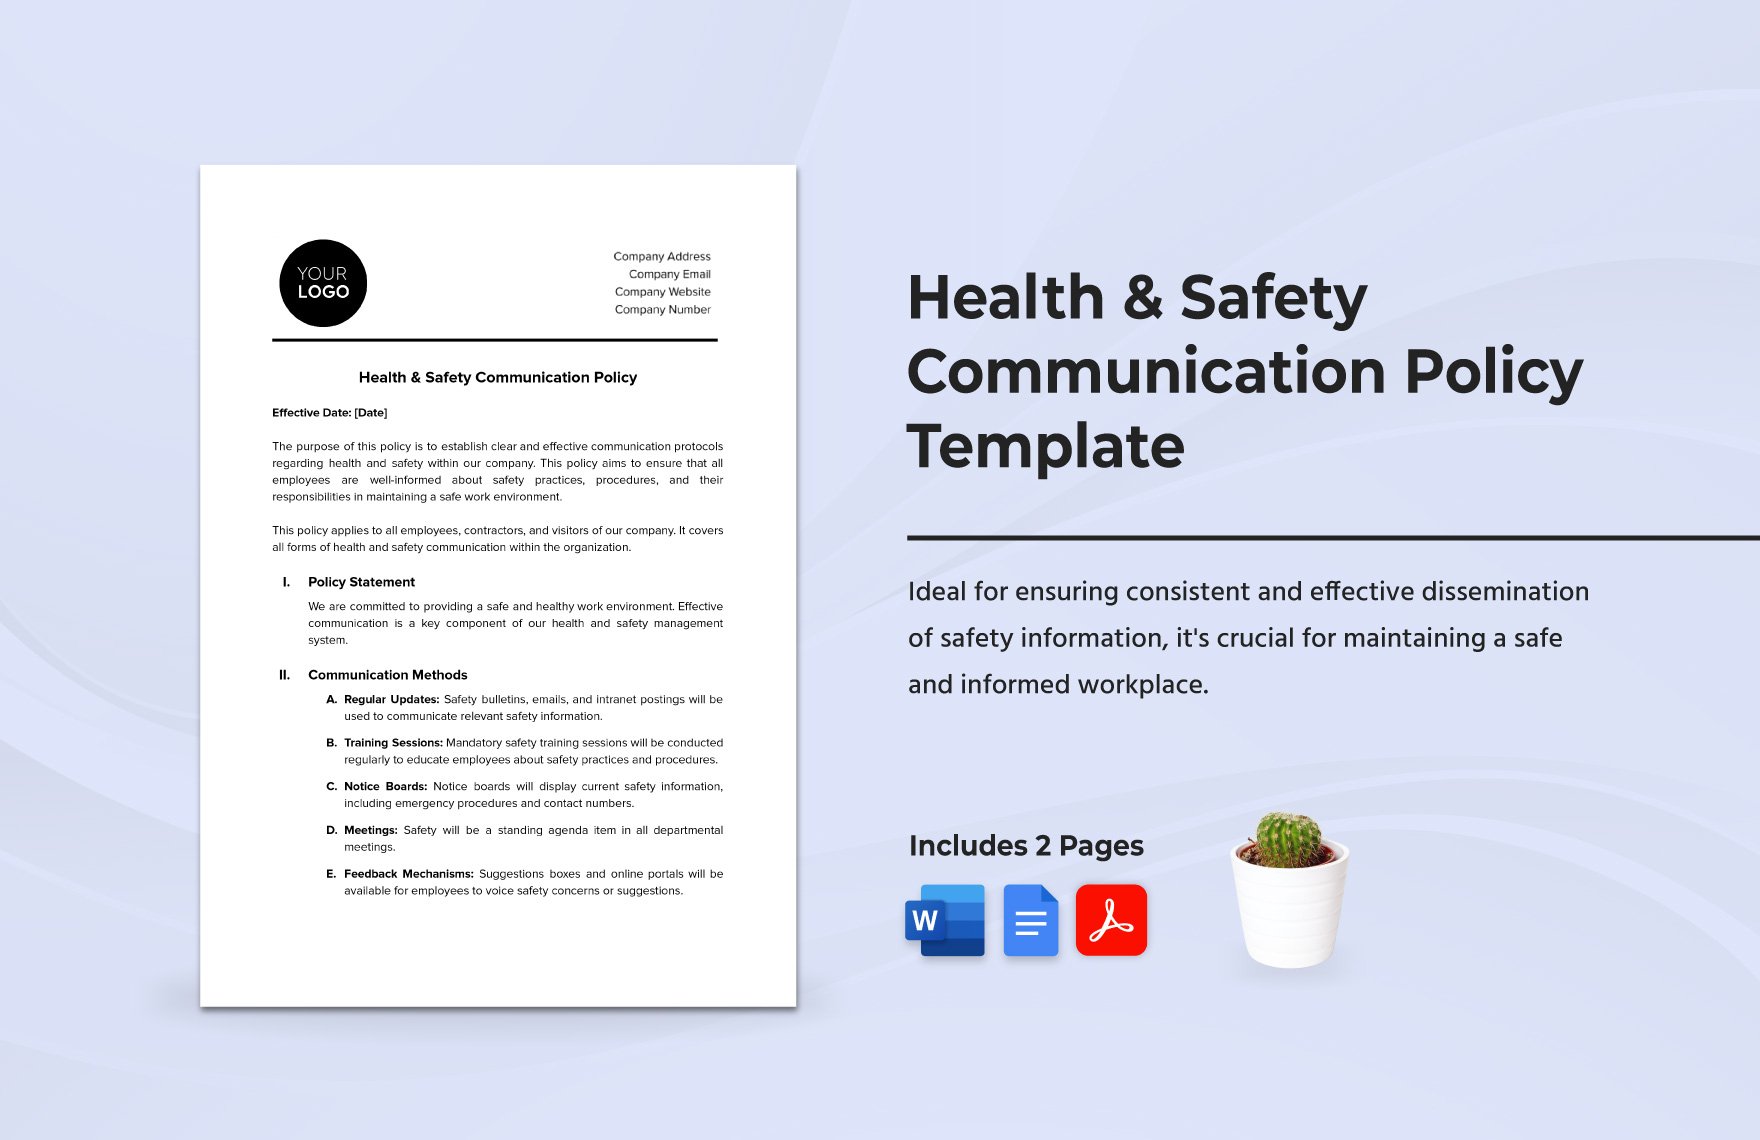 Health & Safety Communication Policy Template